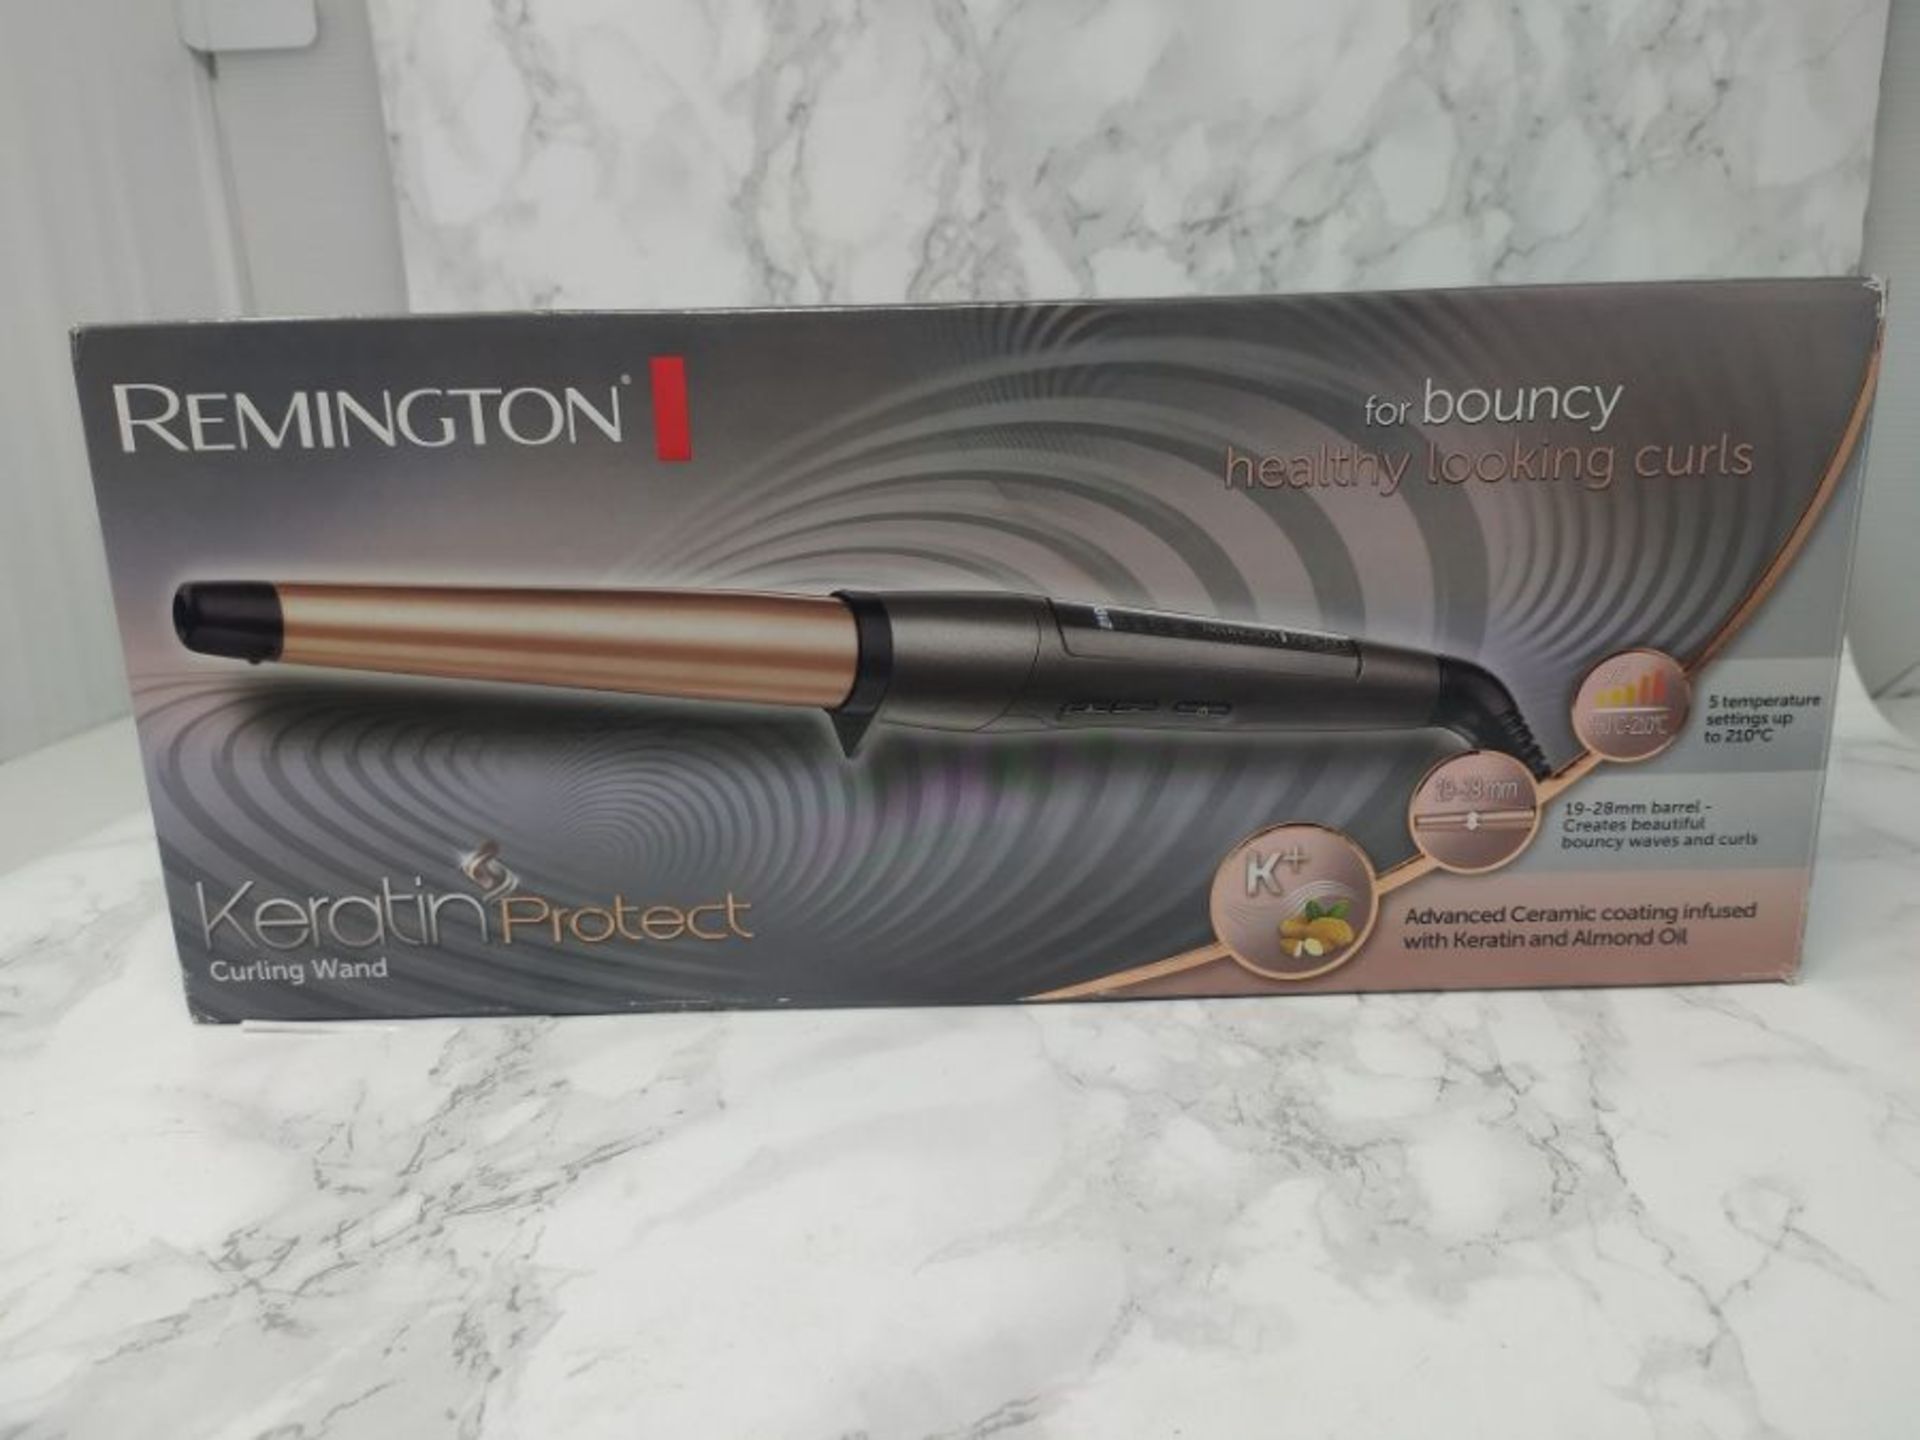 Remington Keratin Protect Hair Curling Wand, Infused with Keratin and Almond Oil for H - Image 2 of 3